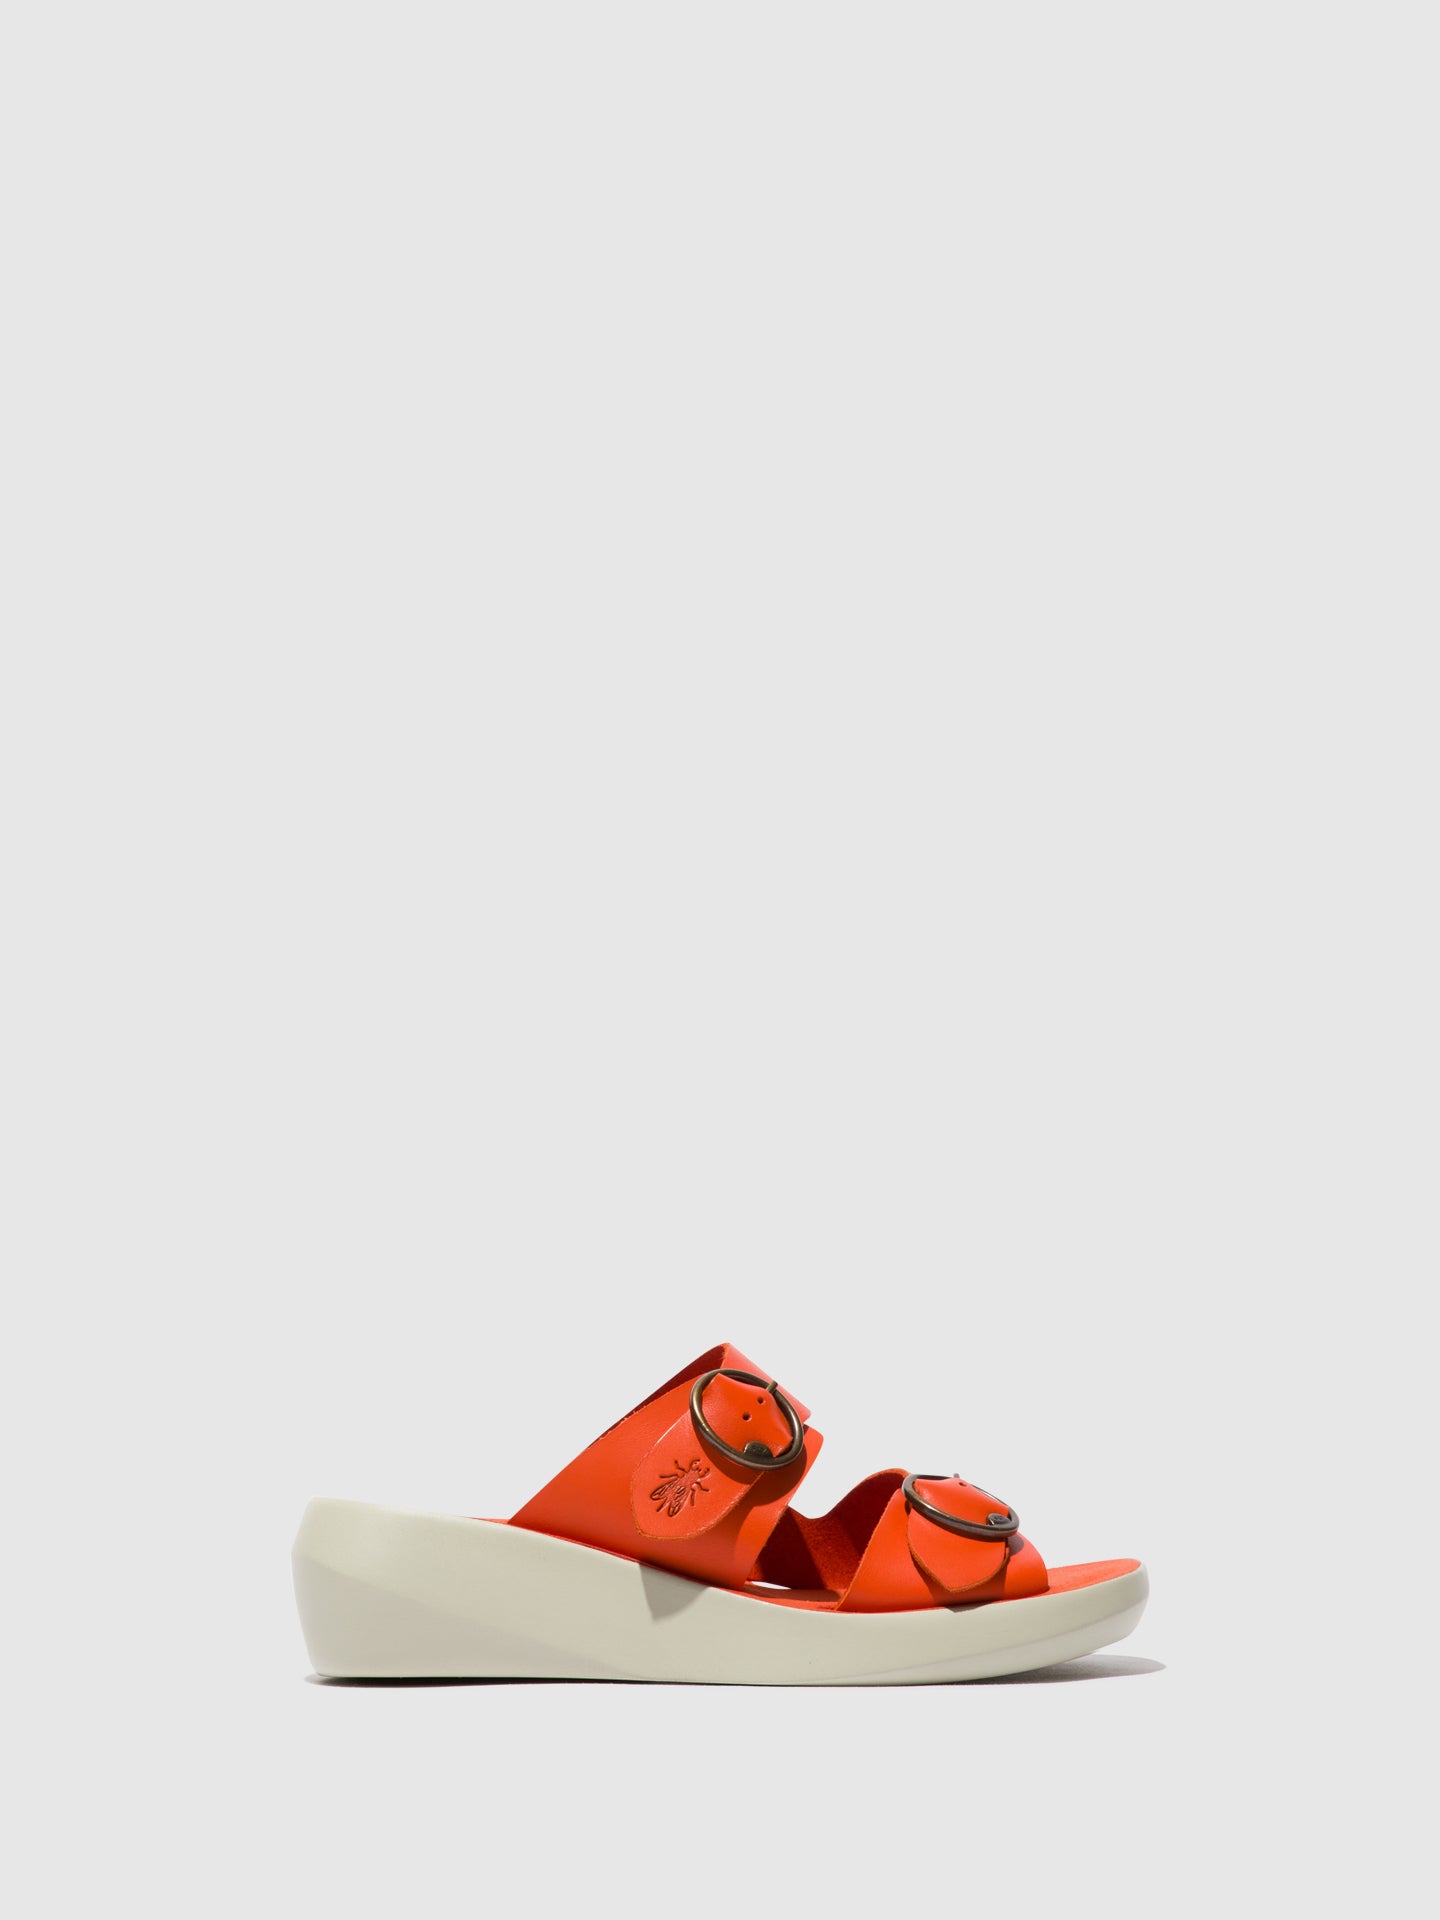 Fly London Buckle Sandals BALD849FLY CORAL